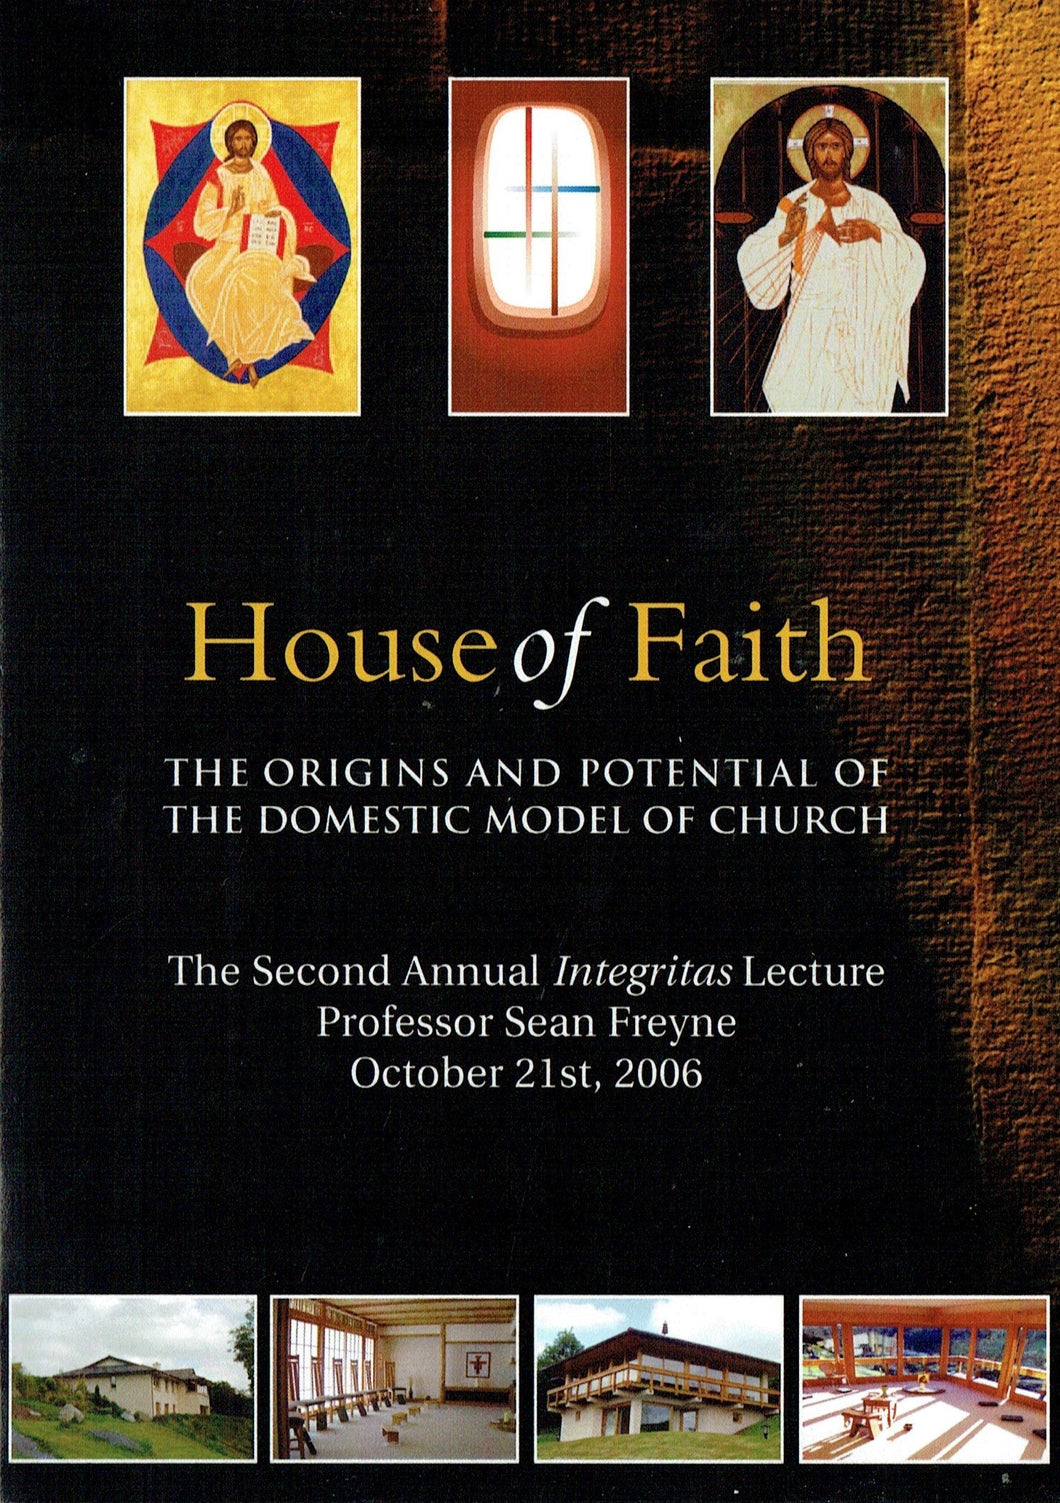 House of Faith: The Origins and Potential of the Domestic Model of Church - The Second Annual Integritas Lecture, Professor Sean Freyne, October 21st, 2006